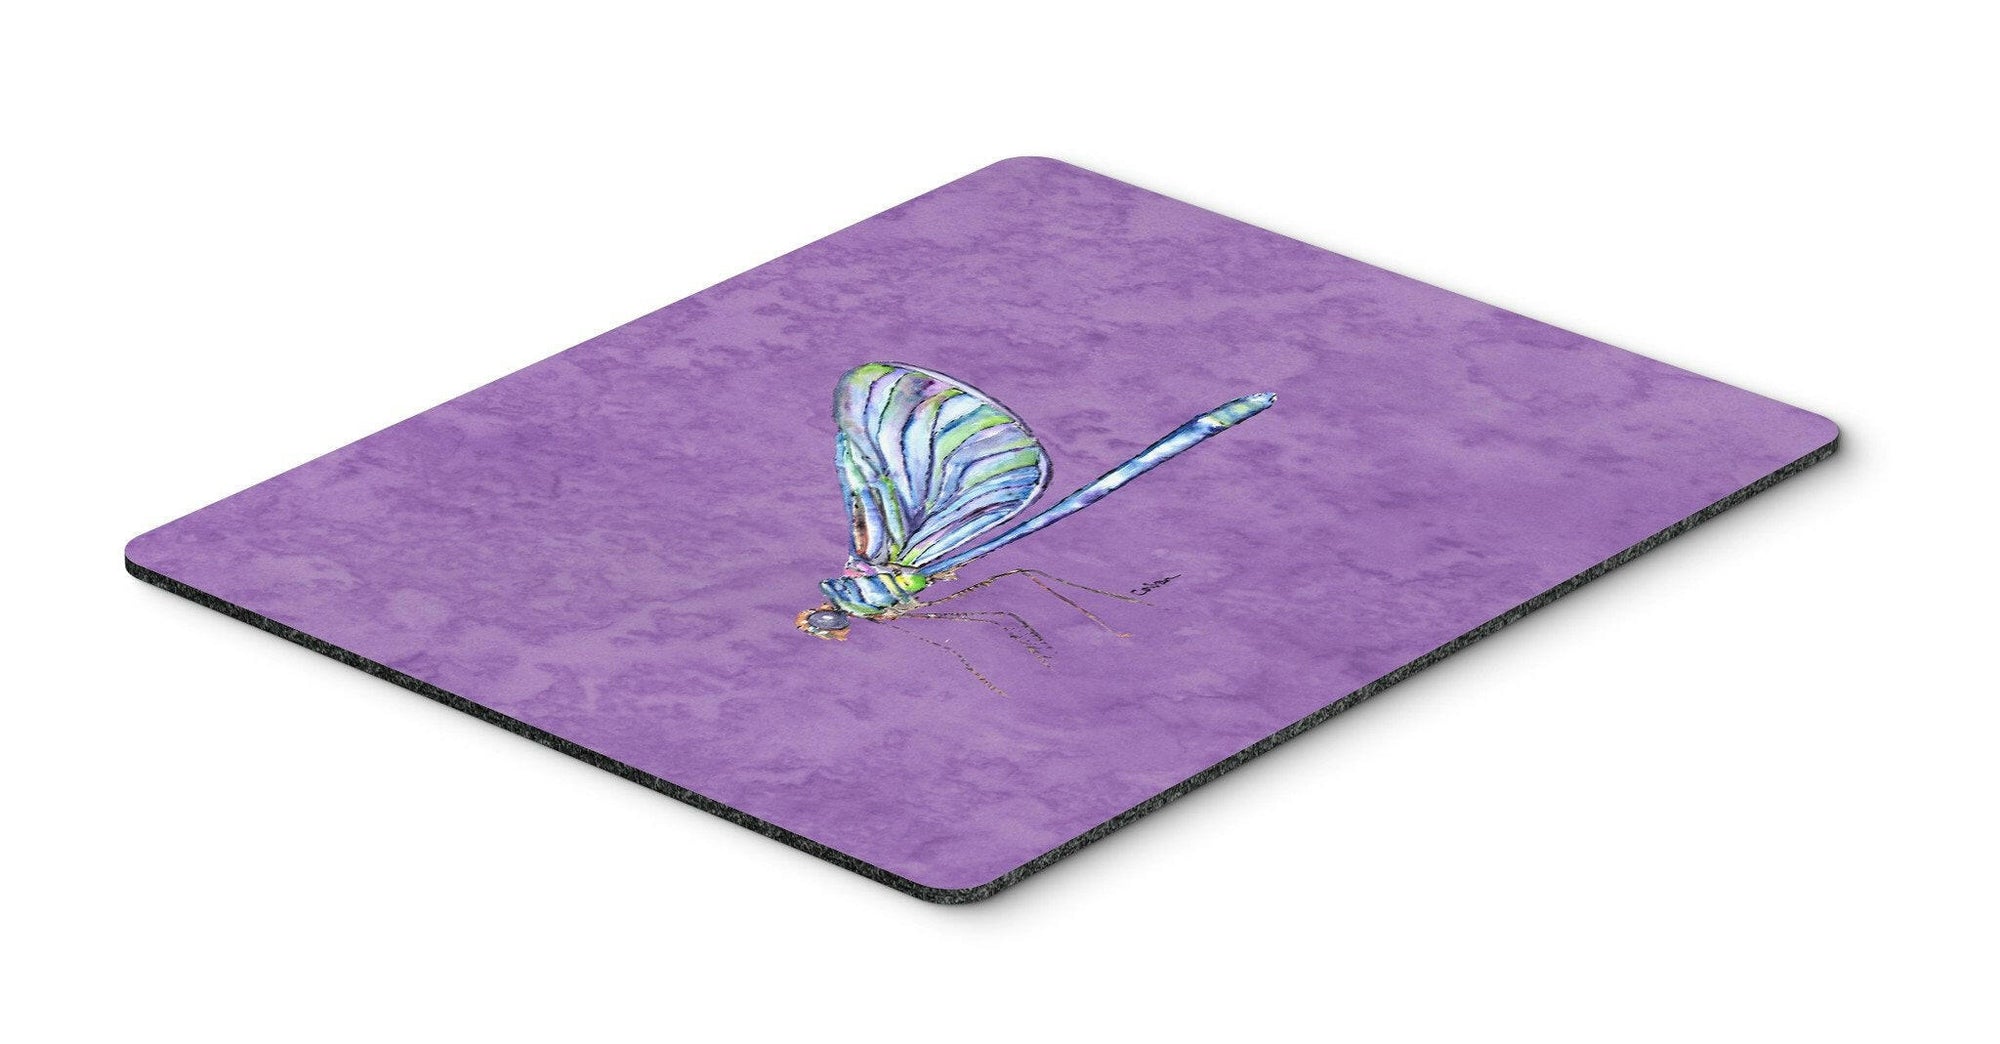 Dragonfly on Purple Mouse Pad, Hot Pad or Trivet by Caroline's Treasures